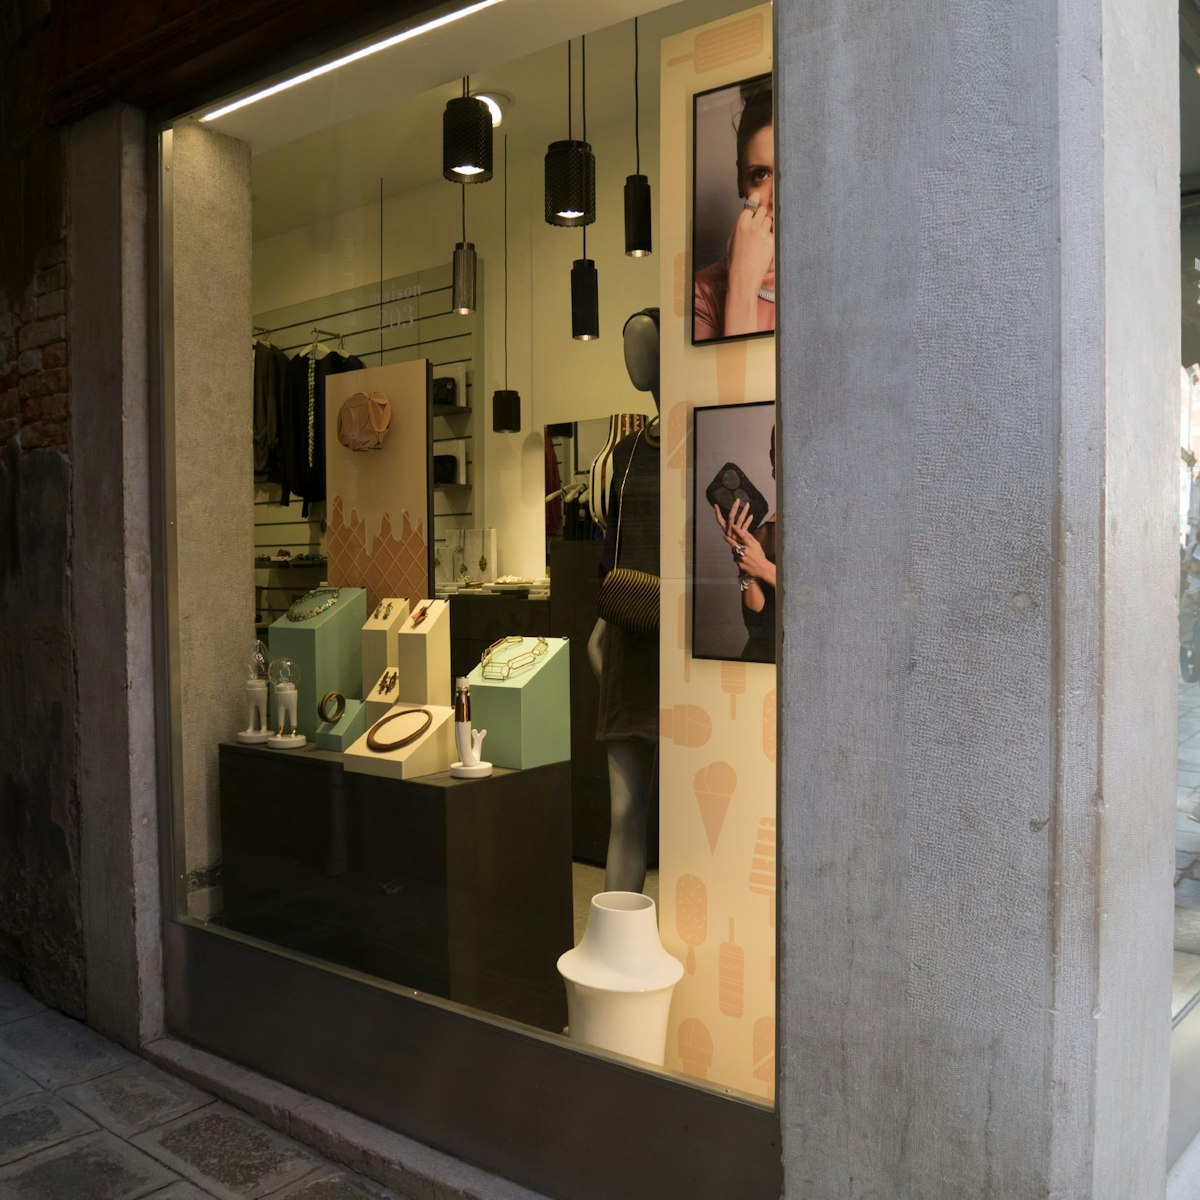 The inviting window display at Maison 203